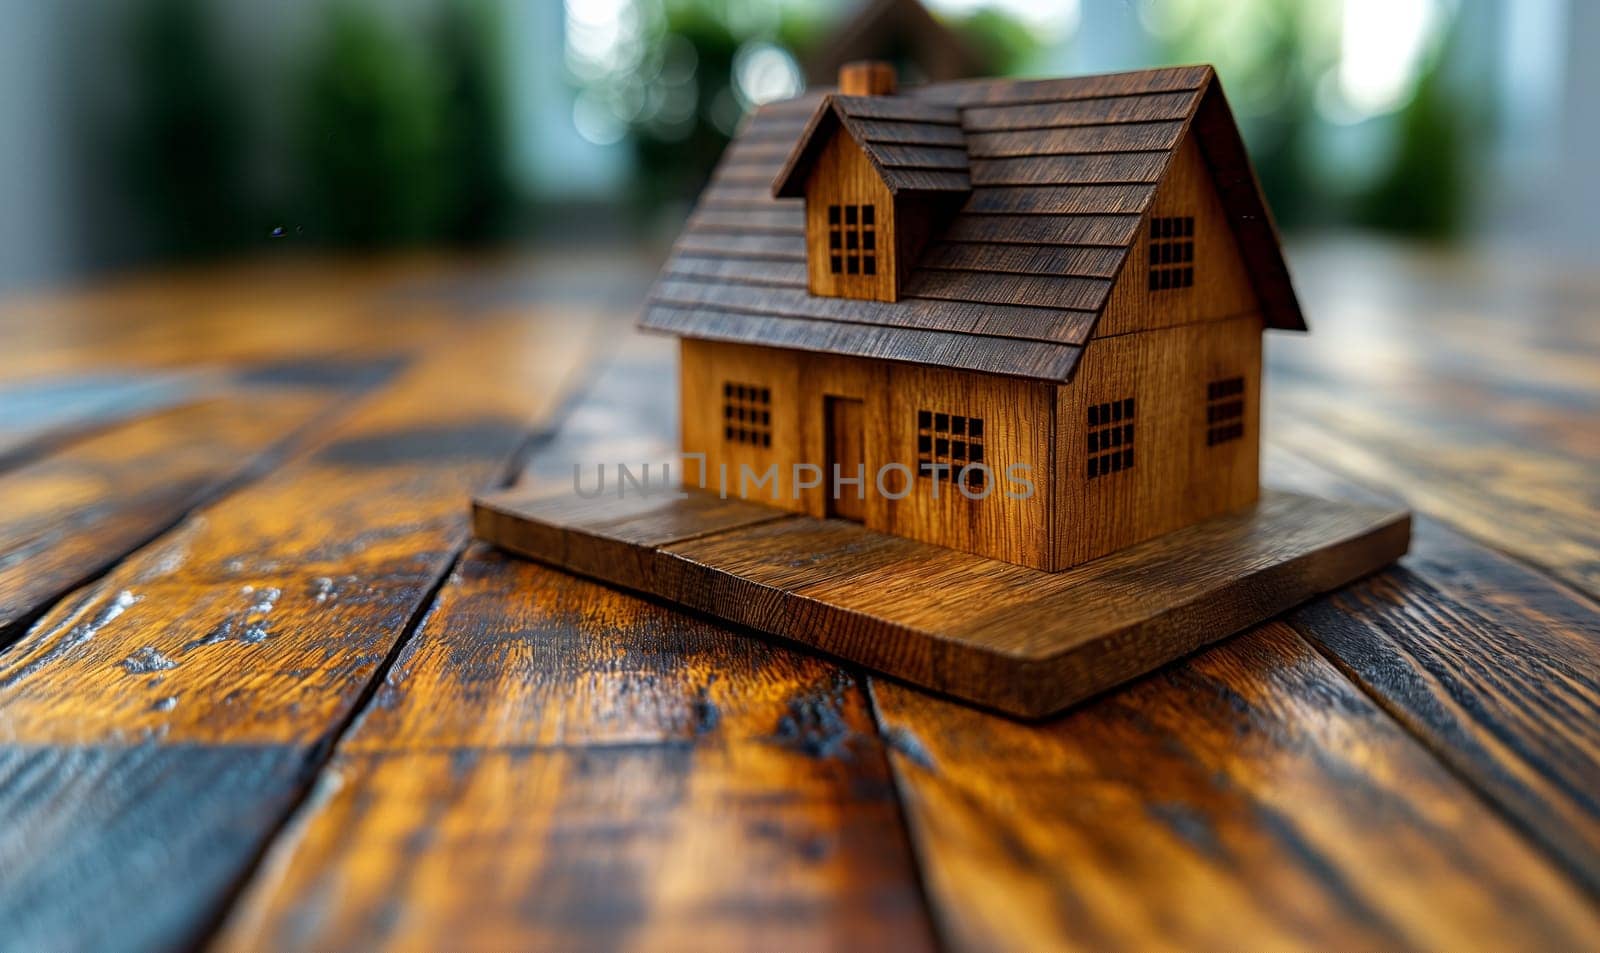 A miniature wooden house placed on top of a wooden table.